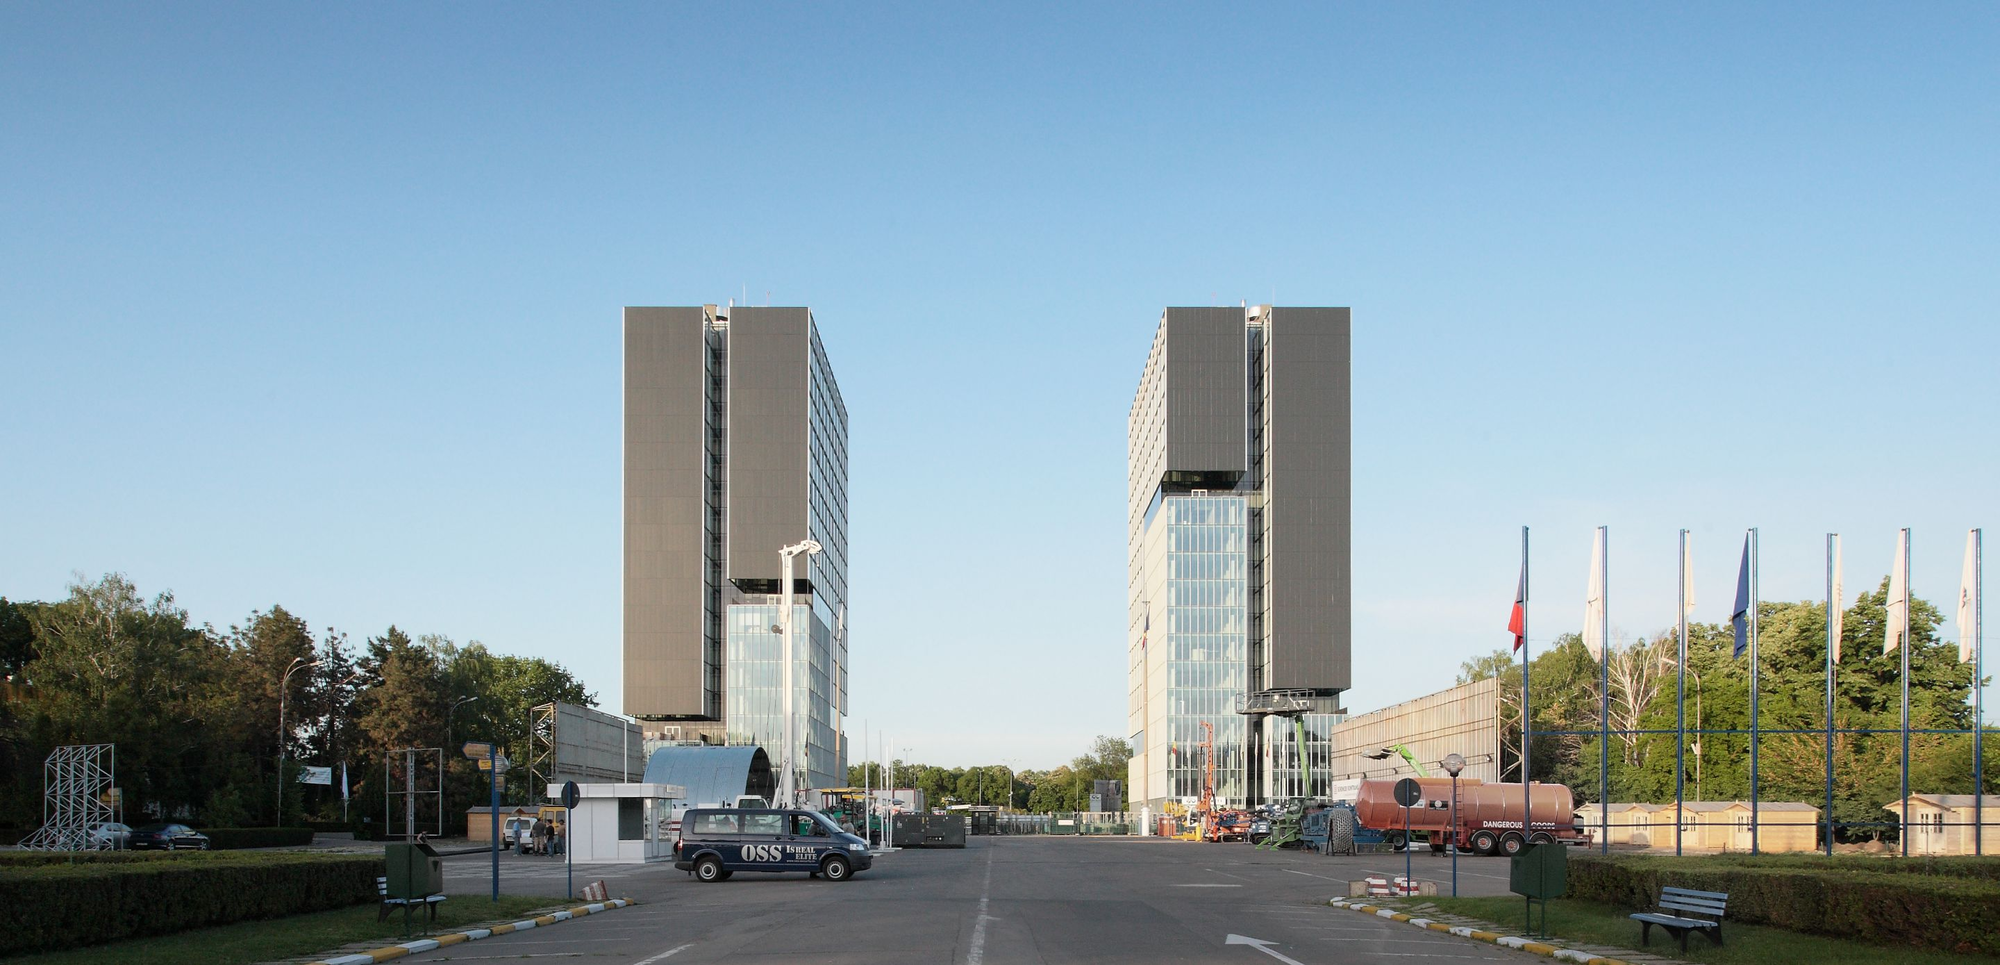 City Gate / Westfourth Architecture | ArchDaily